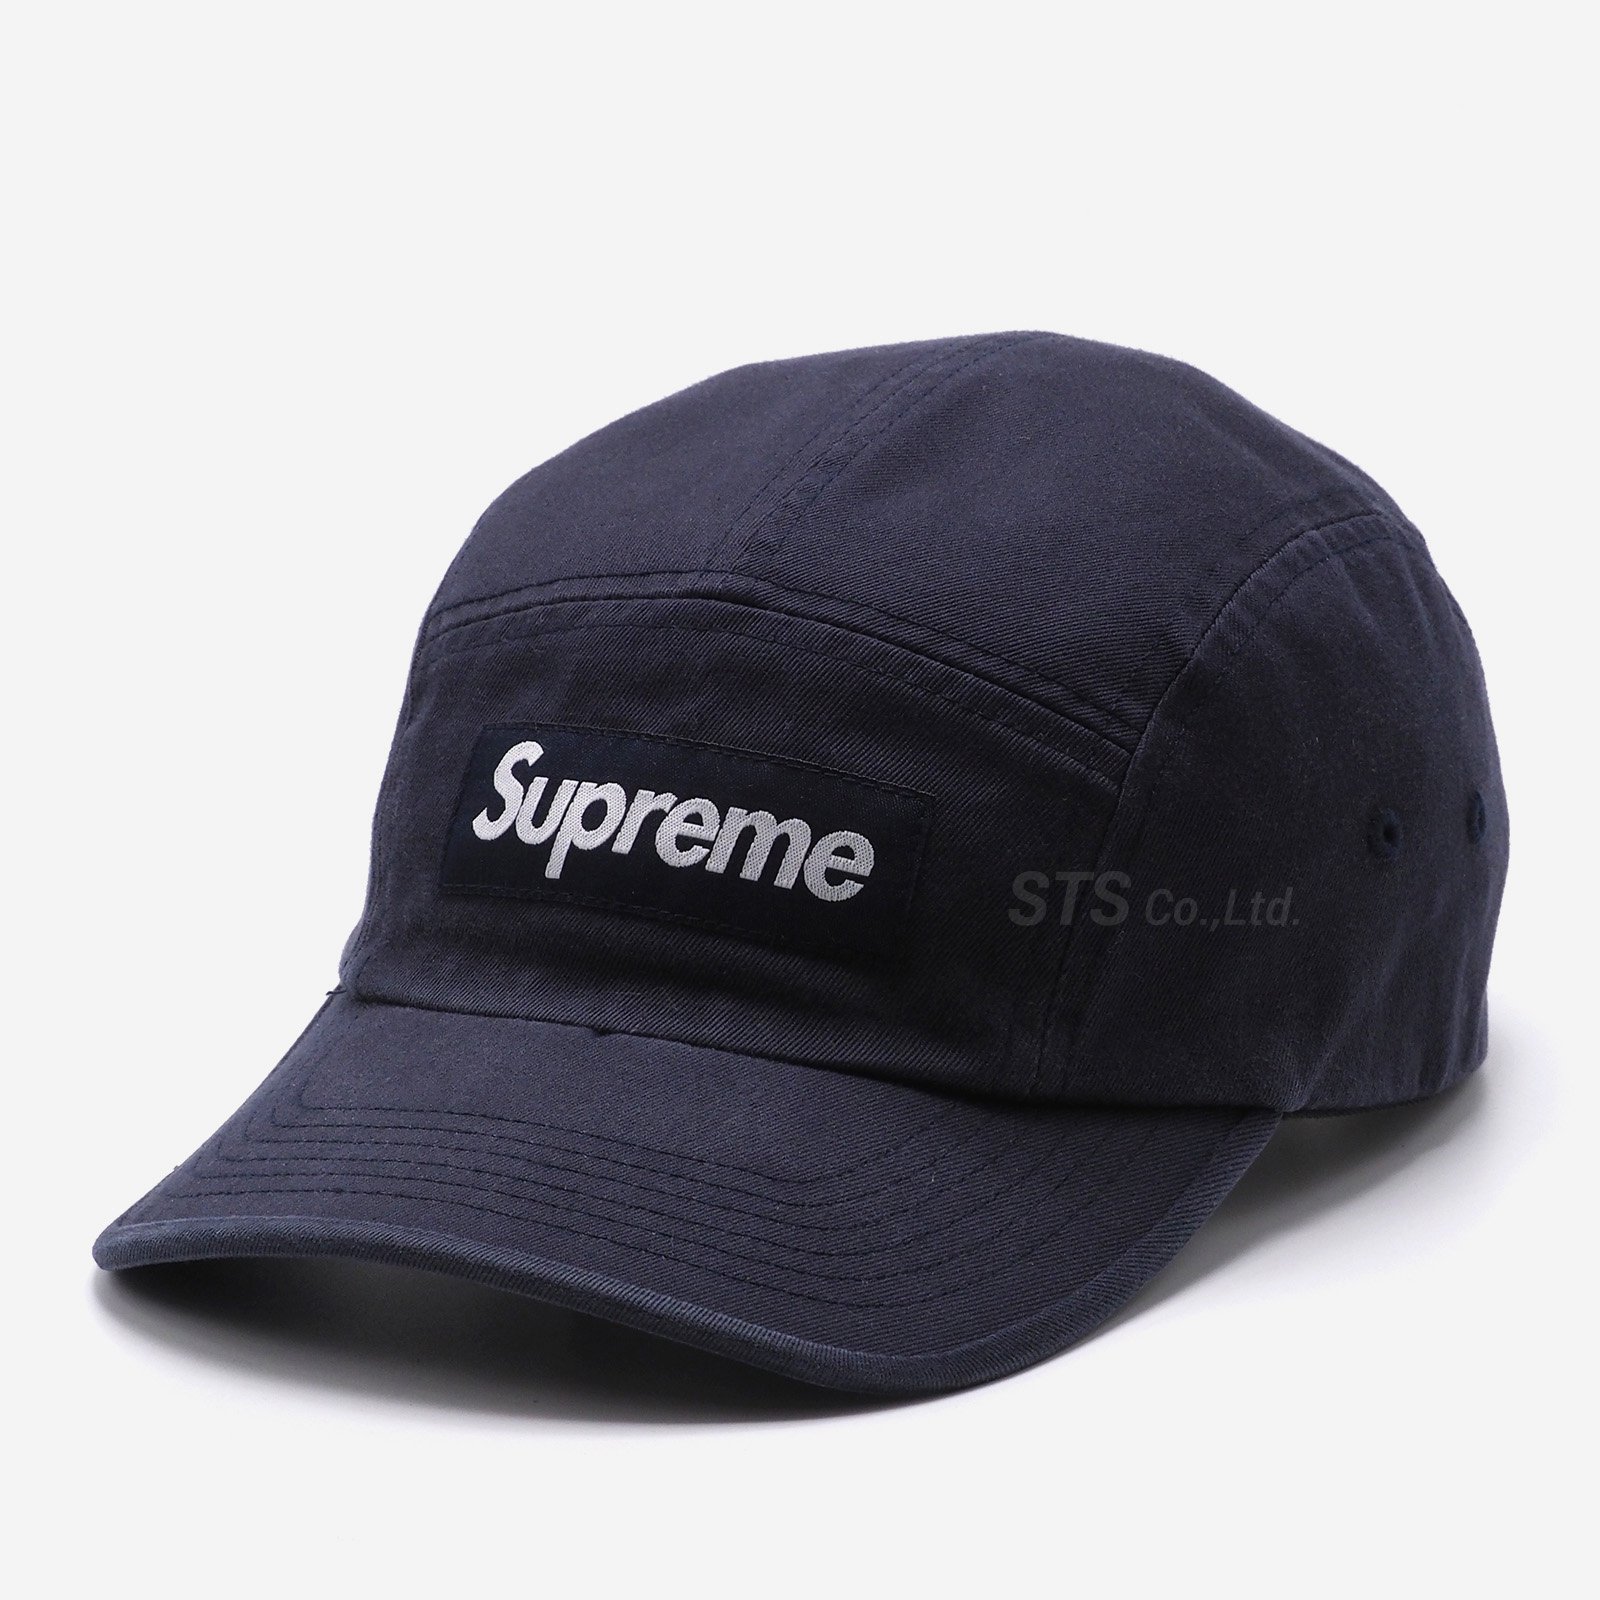 SUPREME Washed Chino Twill Camp Cap キャップ